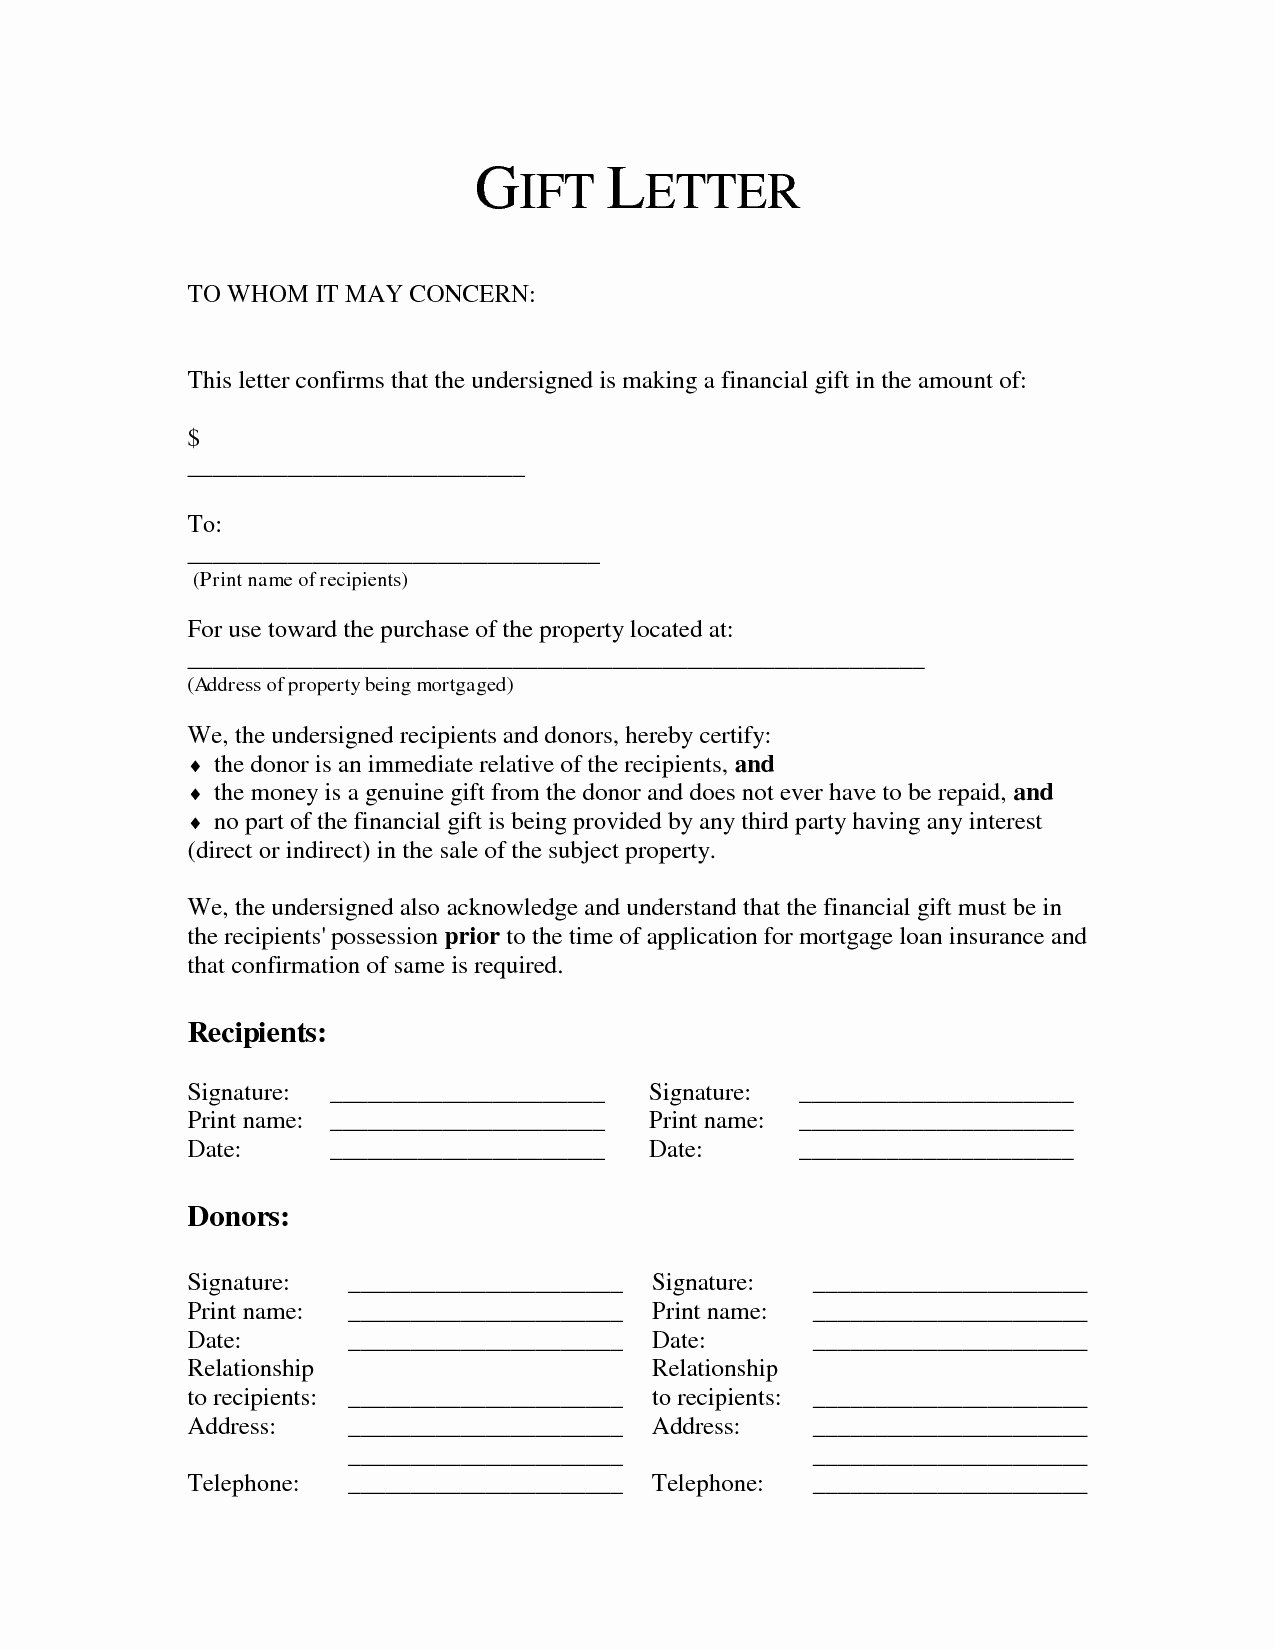 Gift Letter Mortgage Template Unique Gift Letter for Mortgage